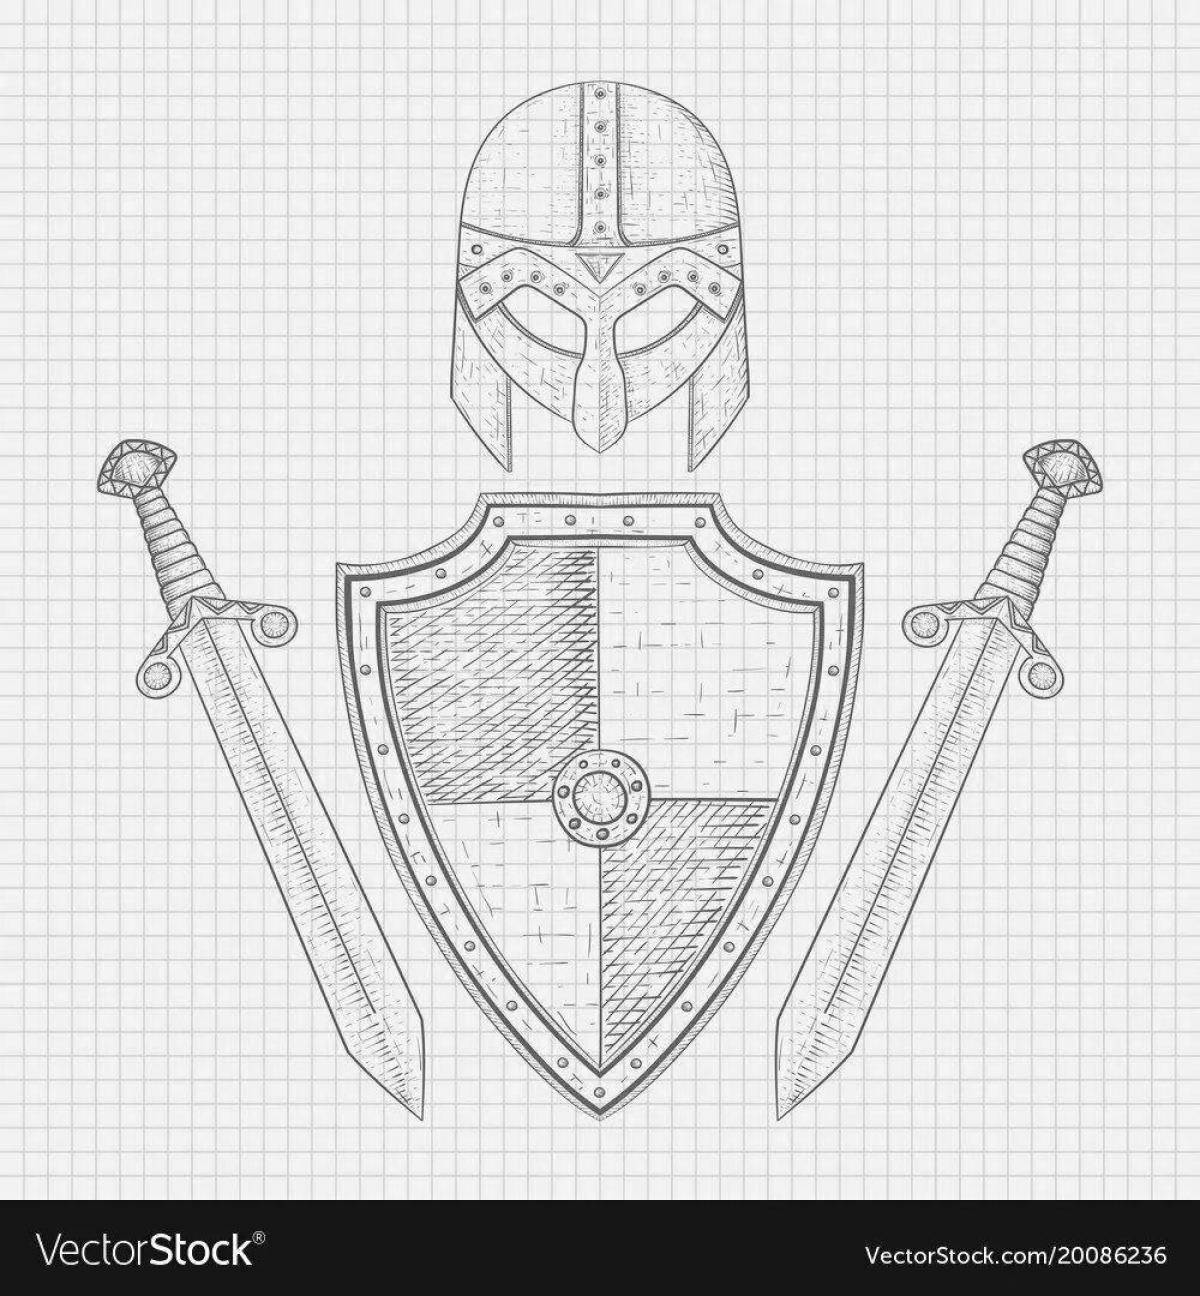 Elegant sword and shield coloring page